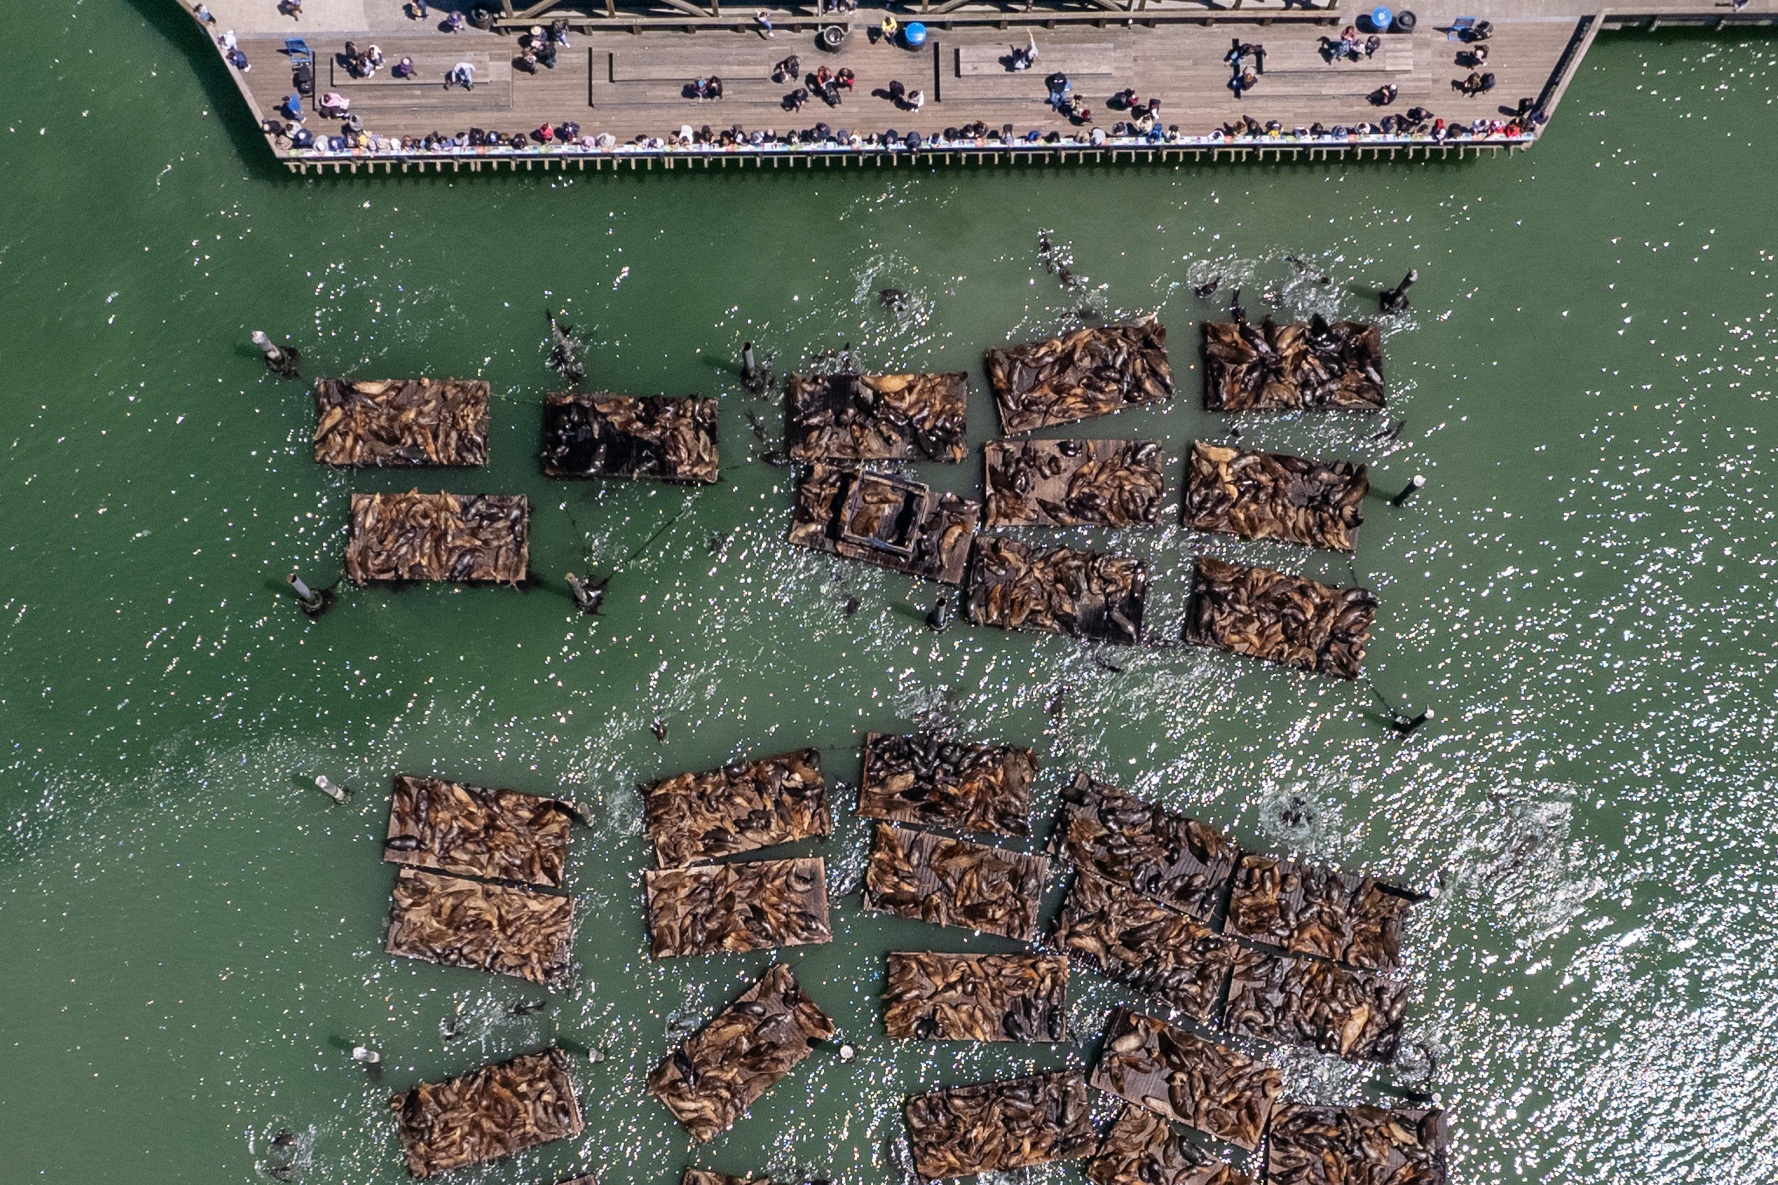 Aerial view of sea lions on docks by a pier with people watching.